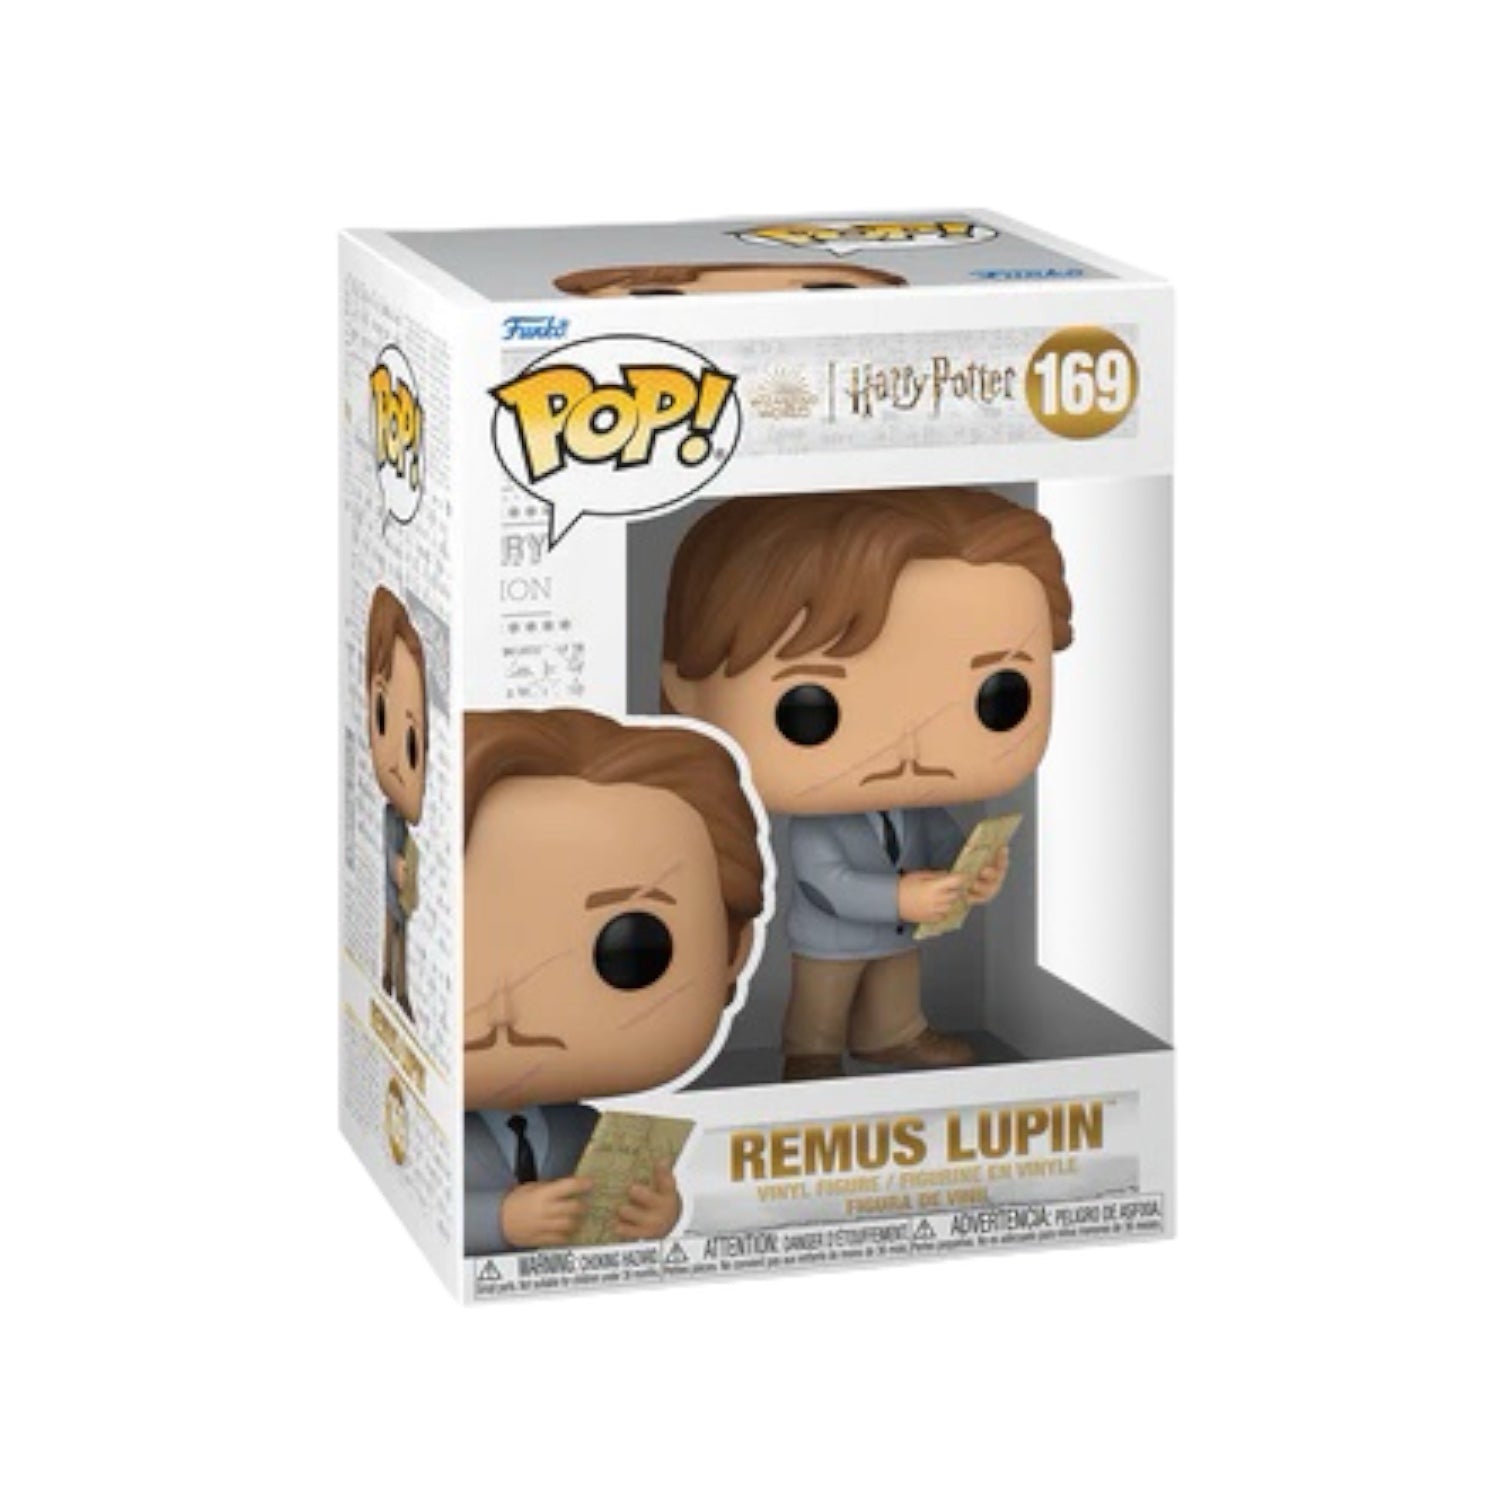 Remus Lupin #169 Funko Pop! Harry Potter - PREORDER